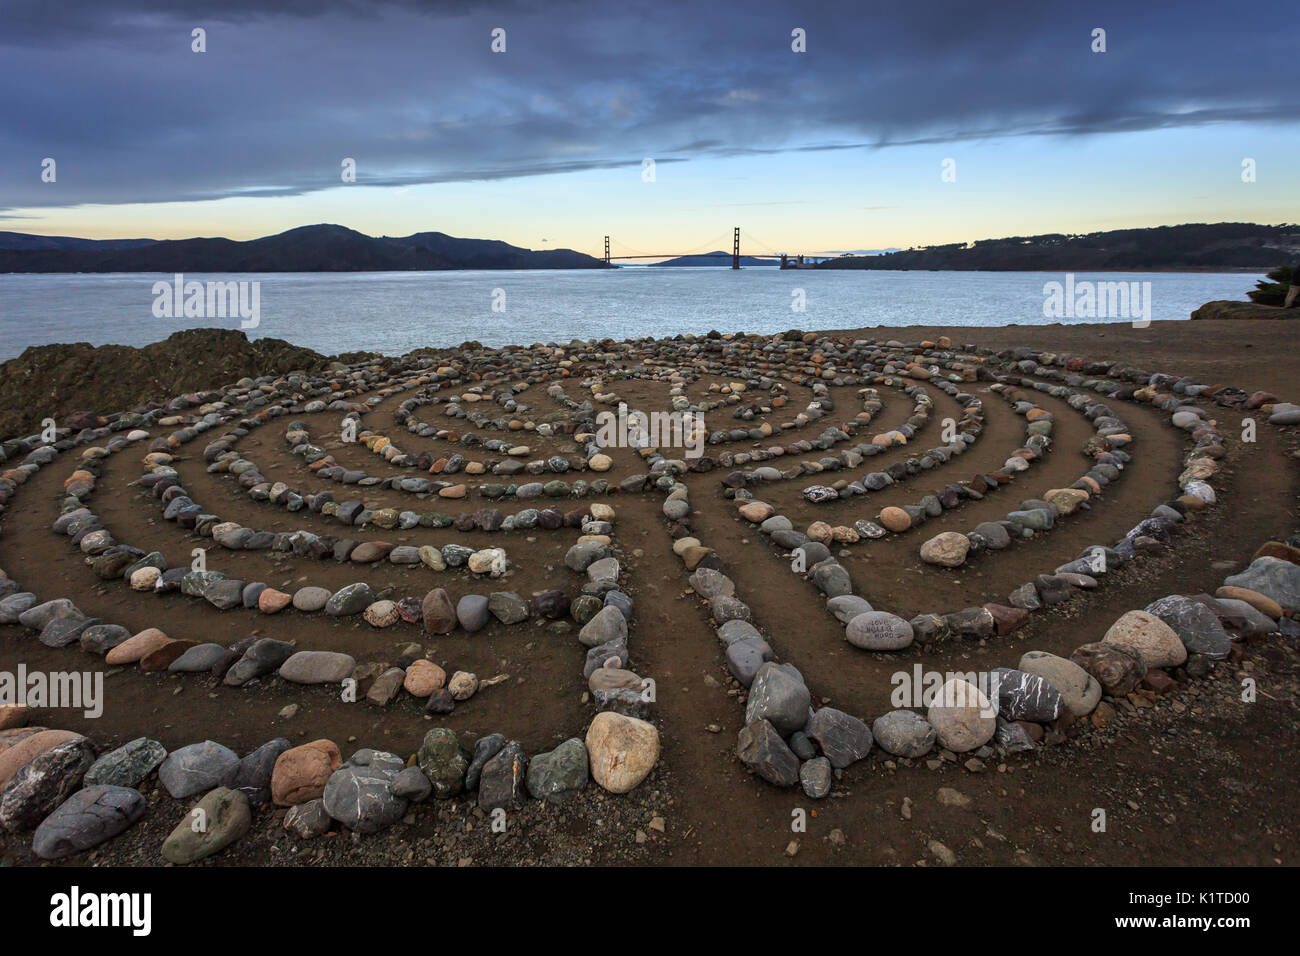 Man made rock maze challenges  hikers on deserted beach Stock Photo